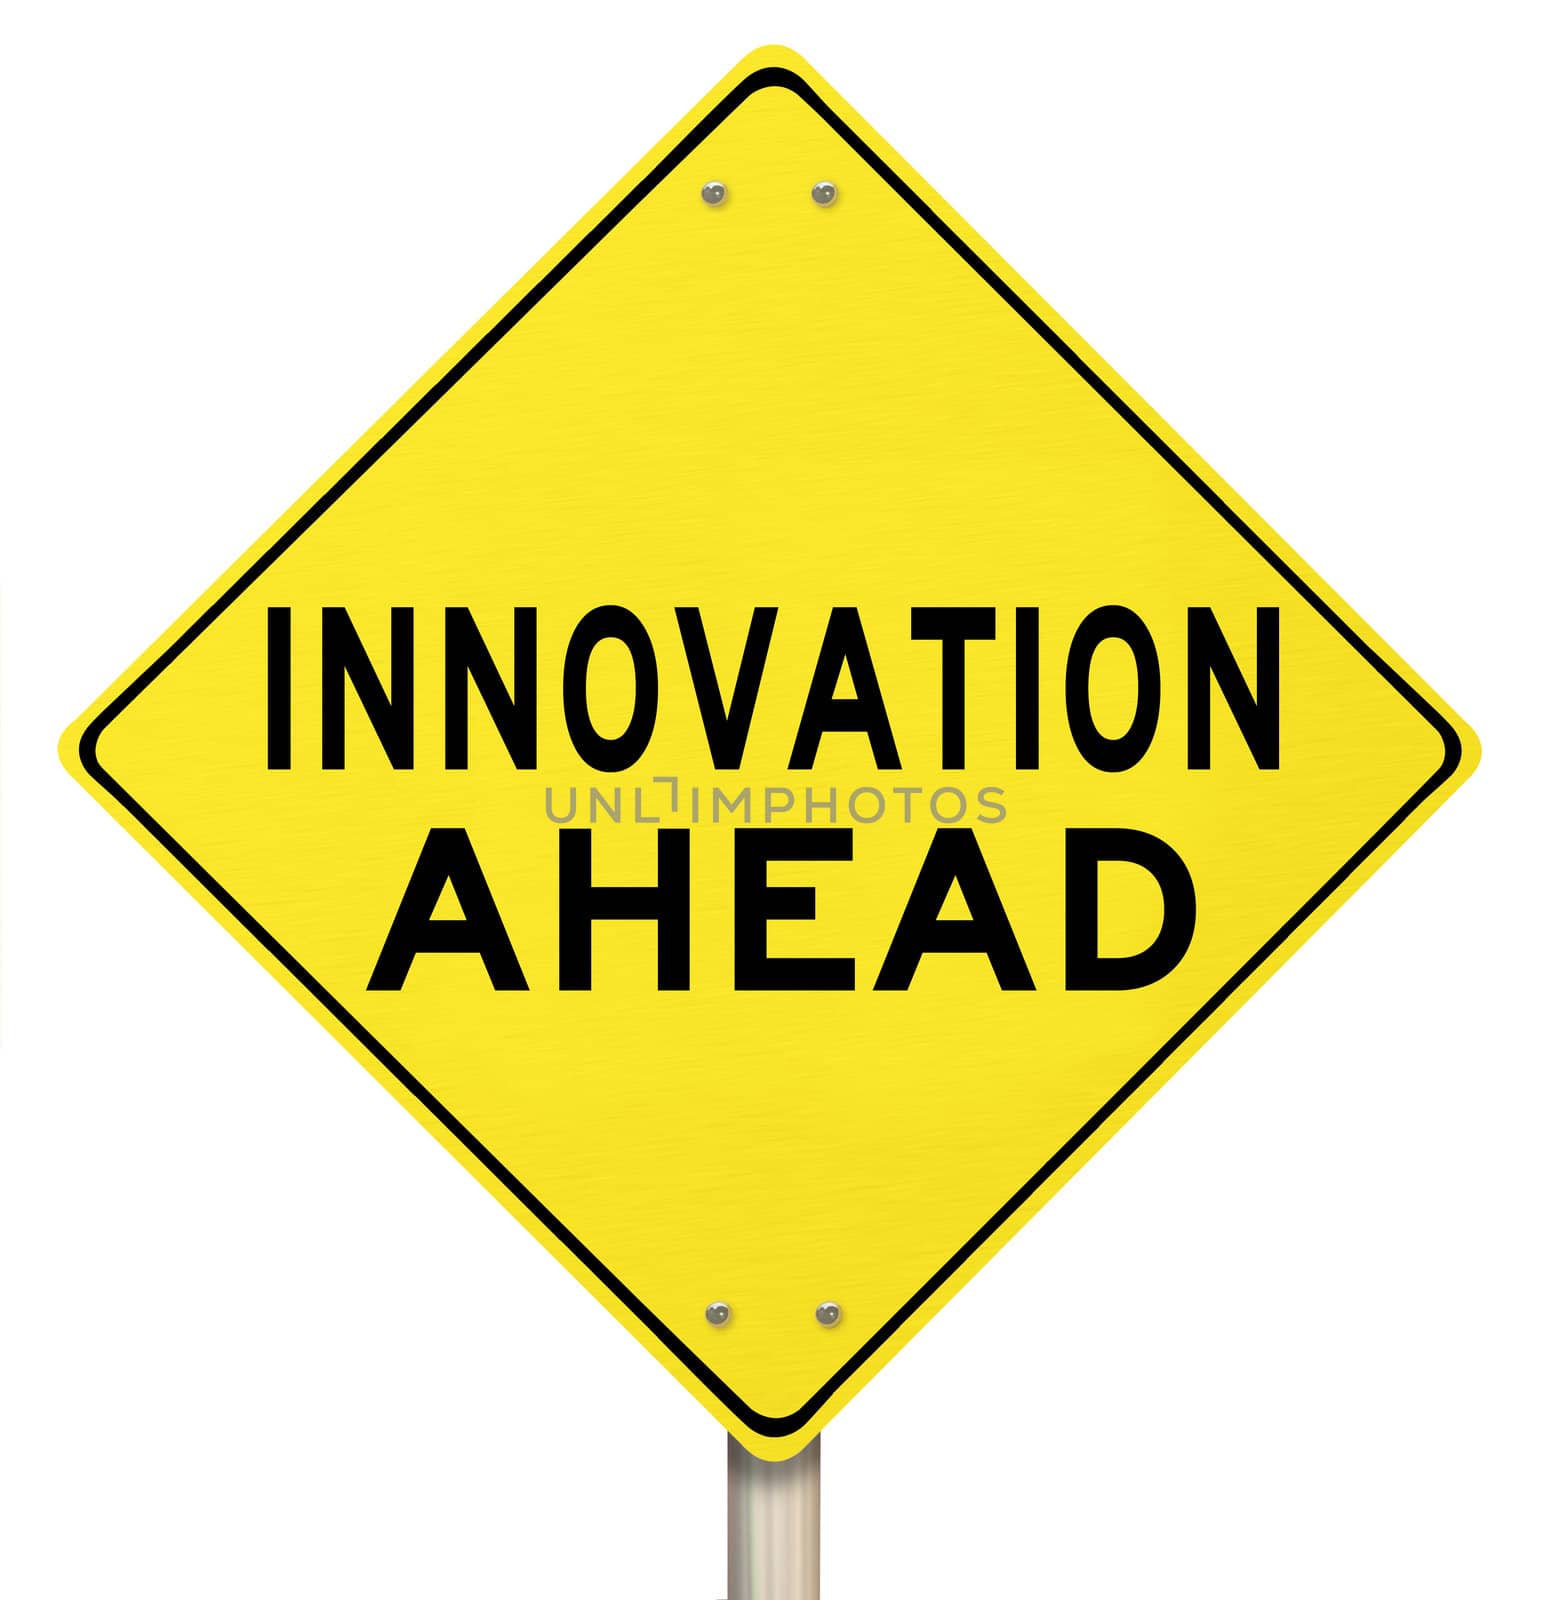 A yellow diamond-shaped road sign informs that Innovation is Ahead, symbolizing growth and change in the future